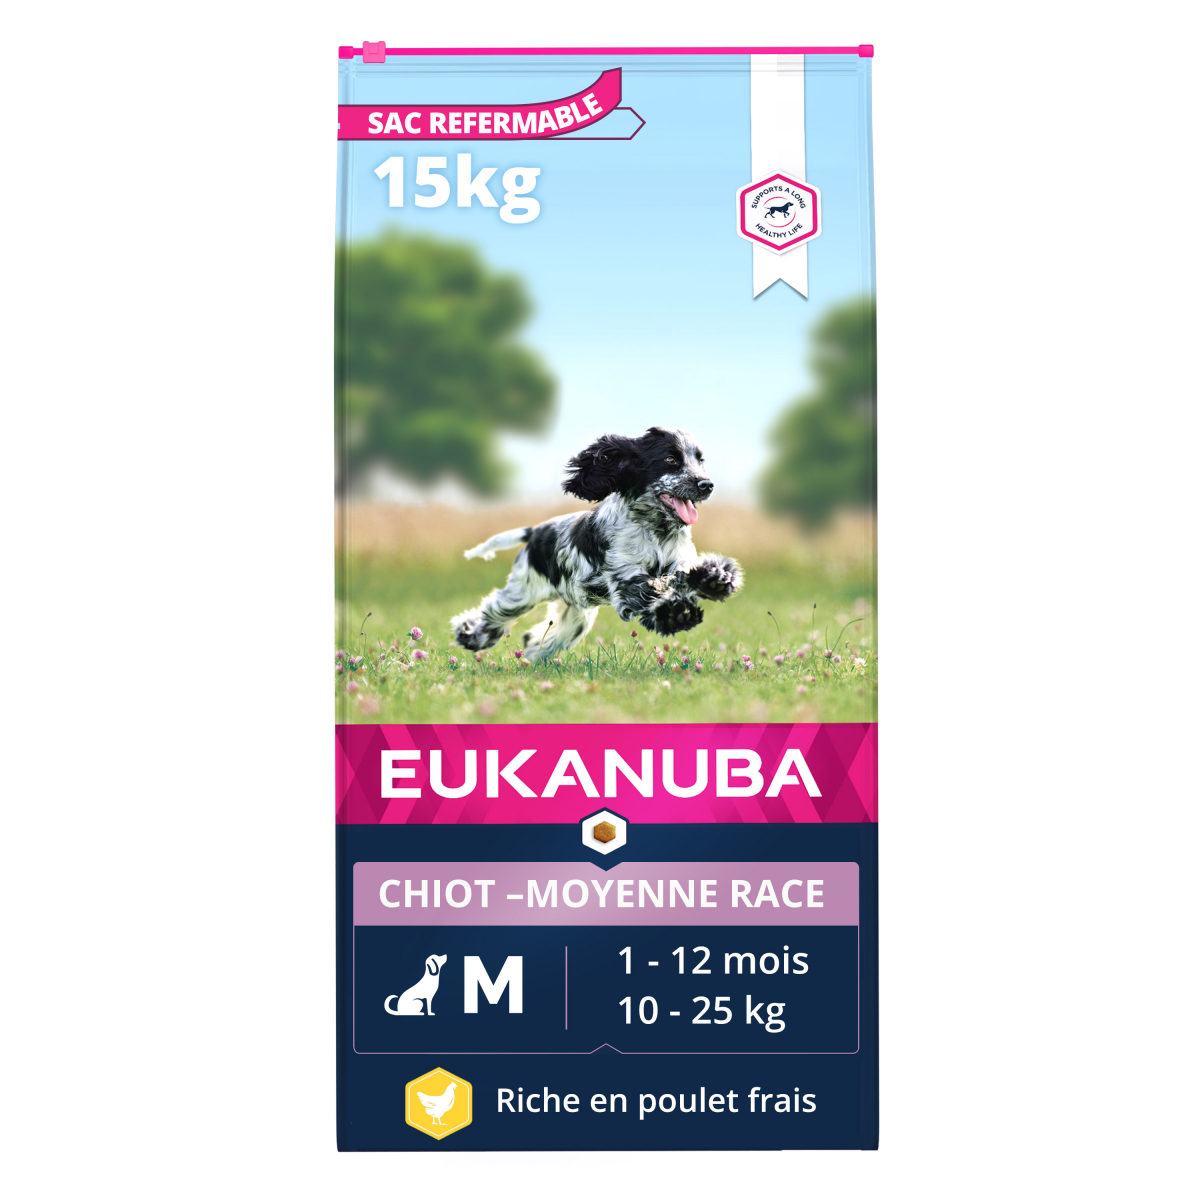 Eukanuba Growing Puppy Medium Breed pour chiot de Taille Moyenne